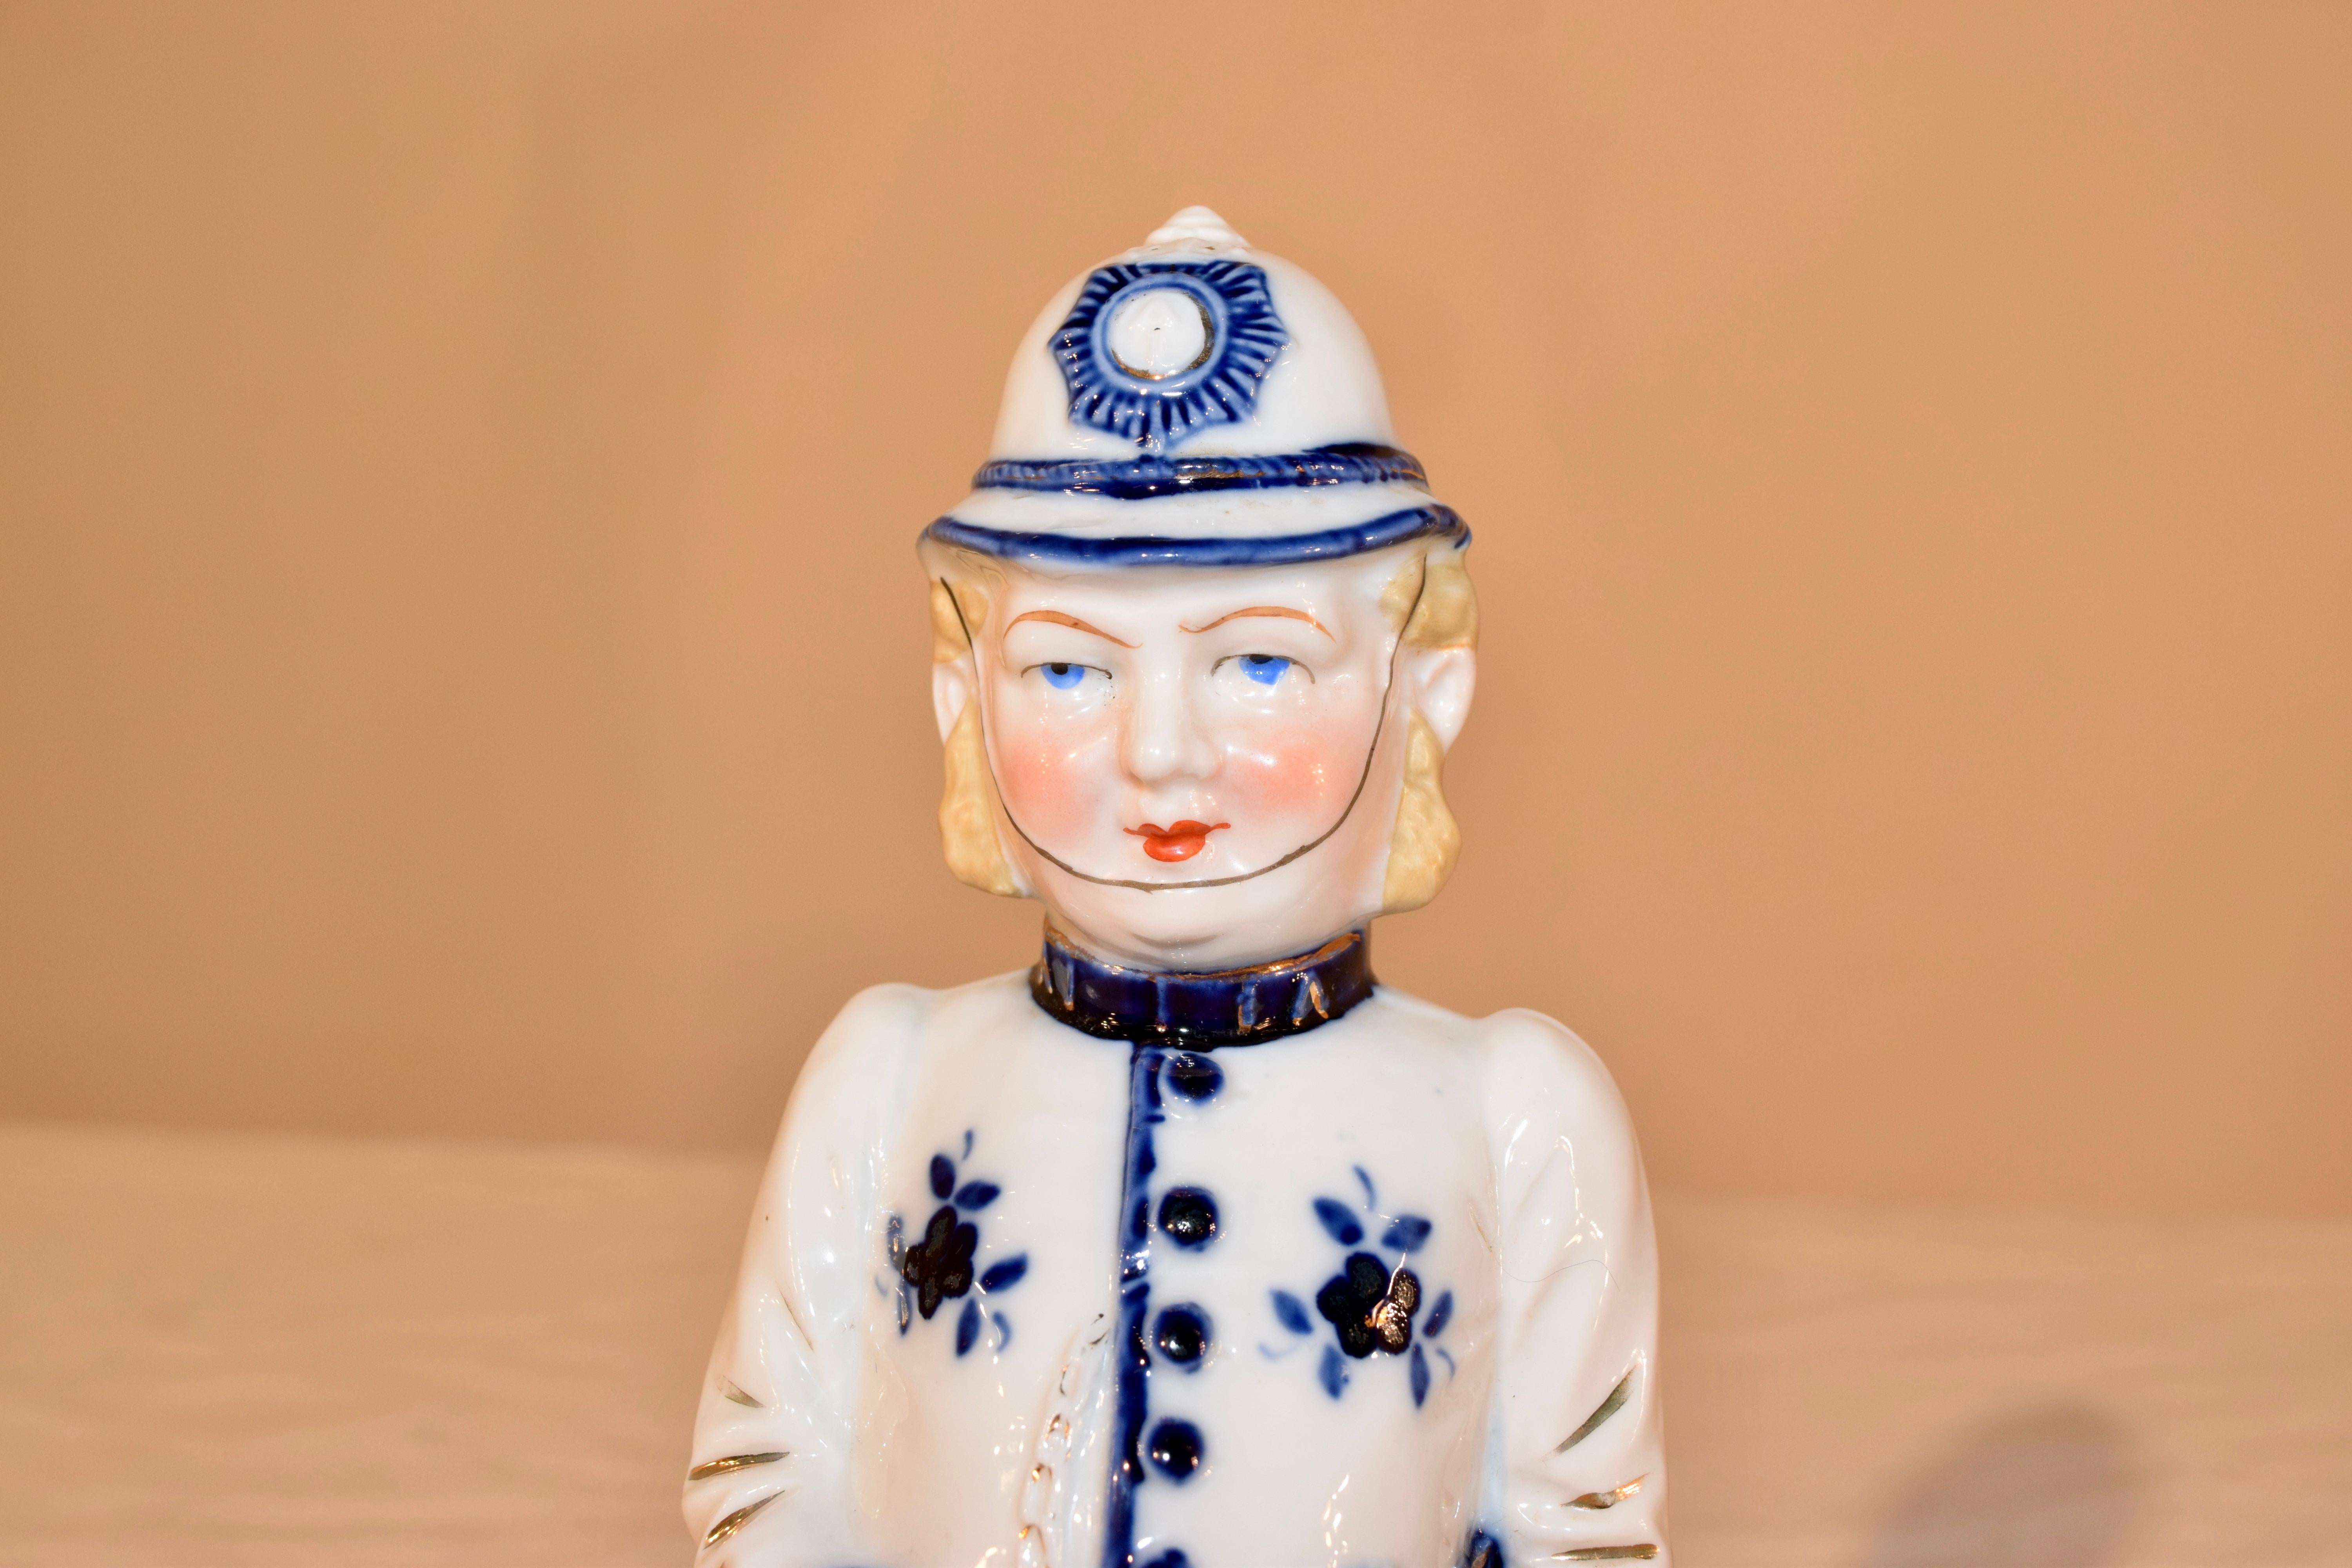 19th century flow blue figure of an English policeman or 